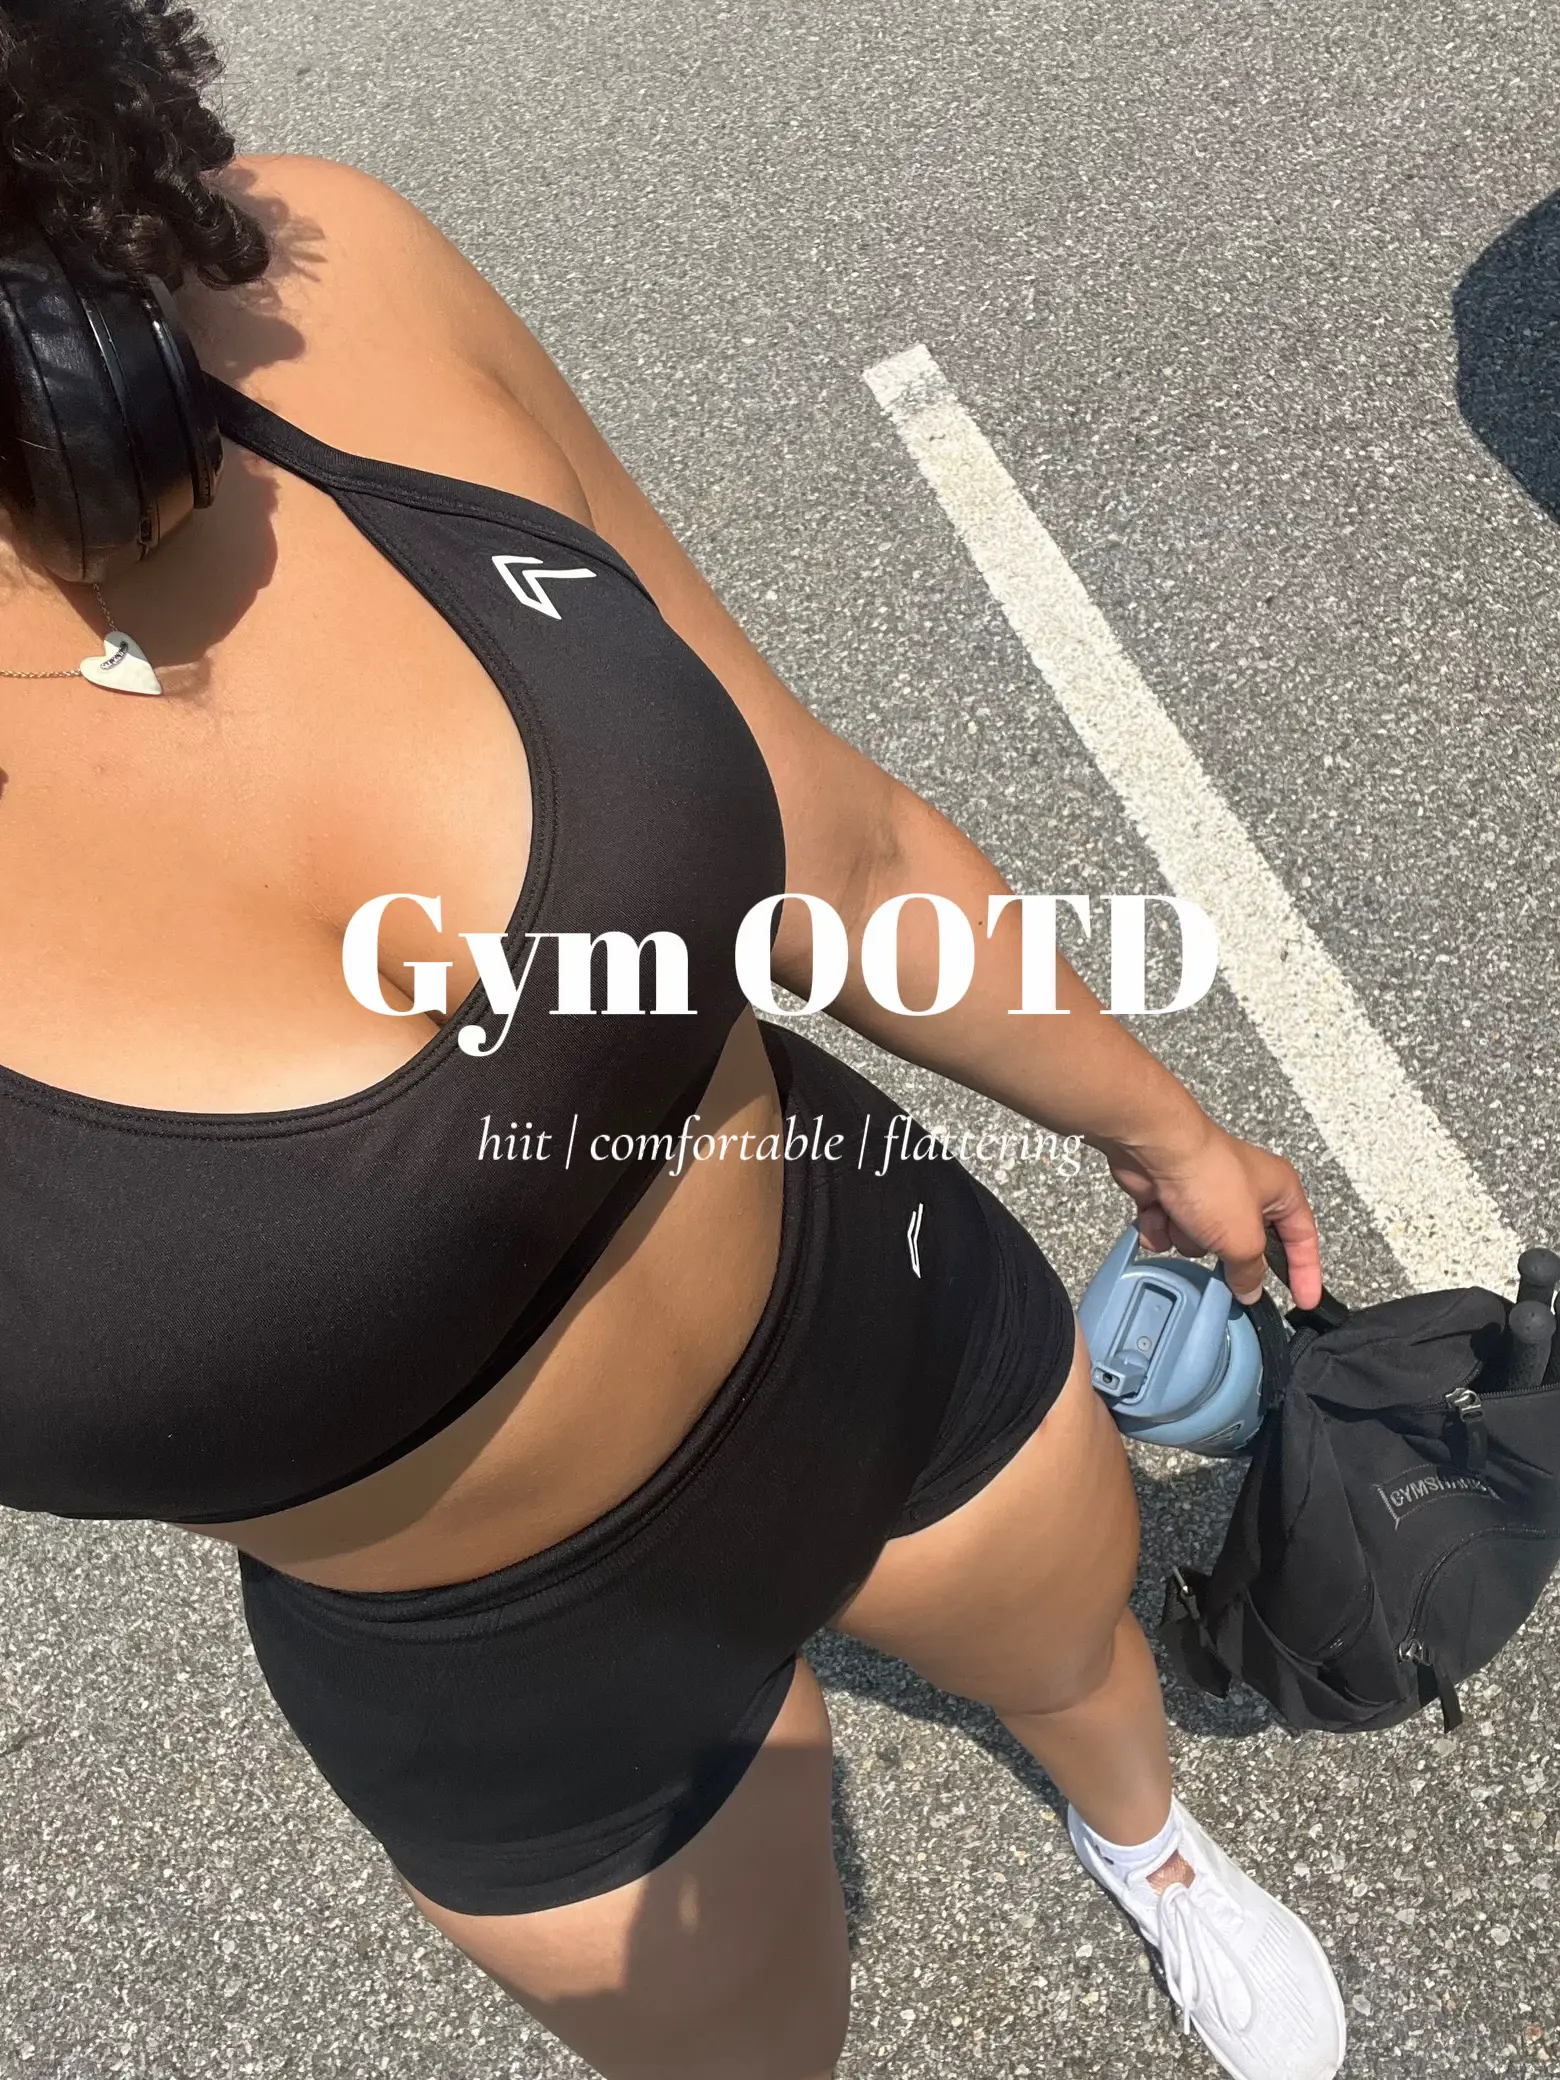 gym ootd, comfortable hiit fit, Gallery posted by Trin